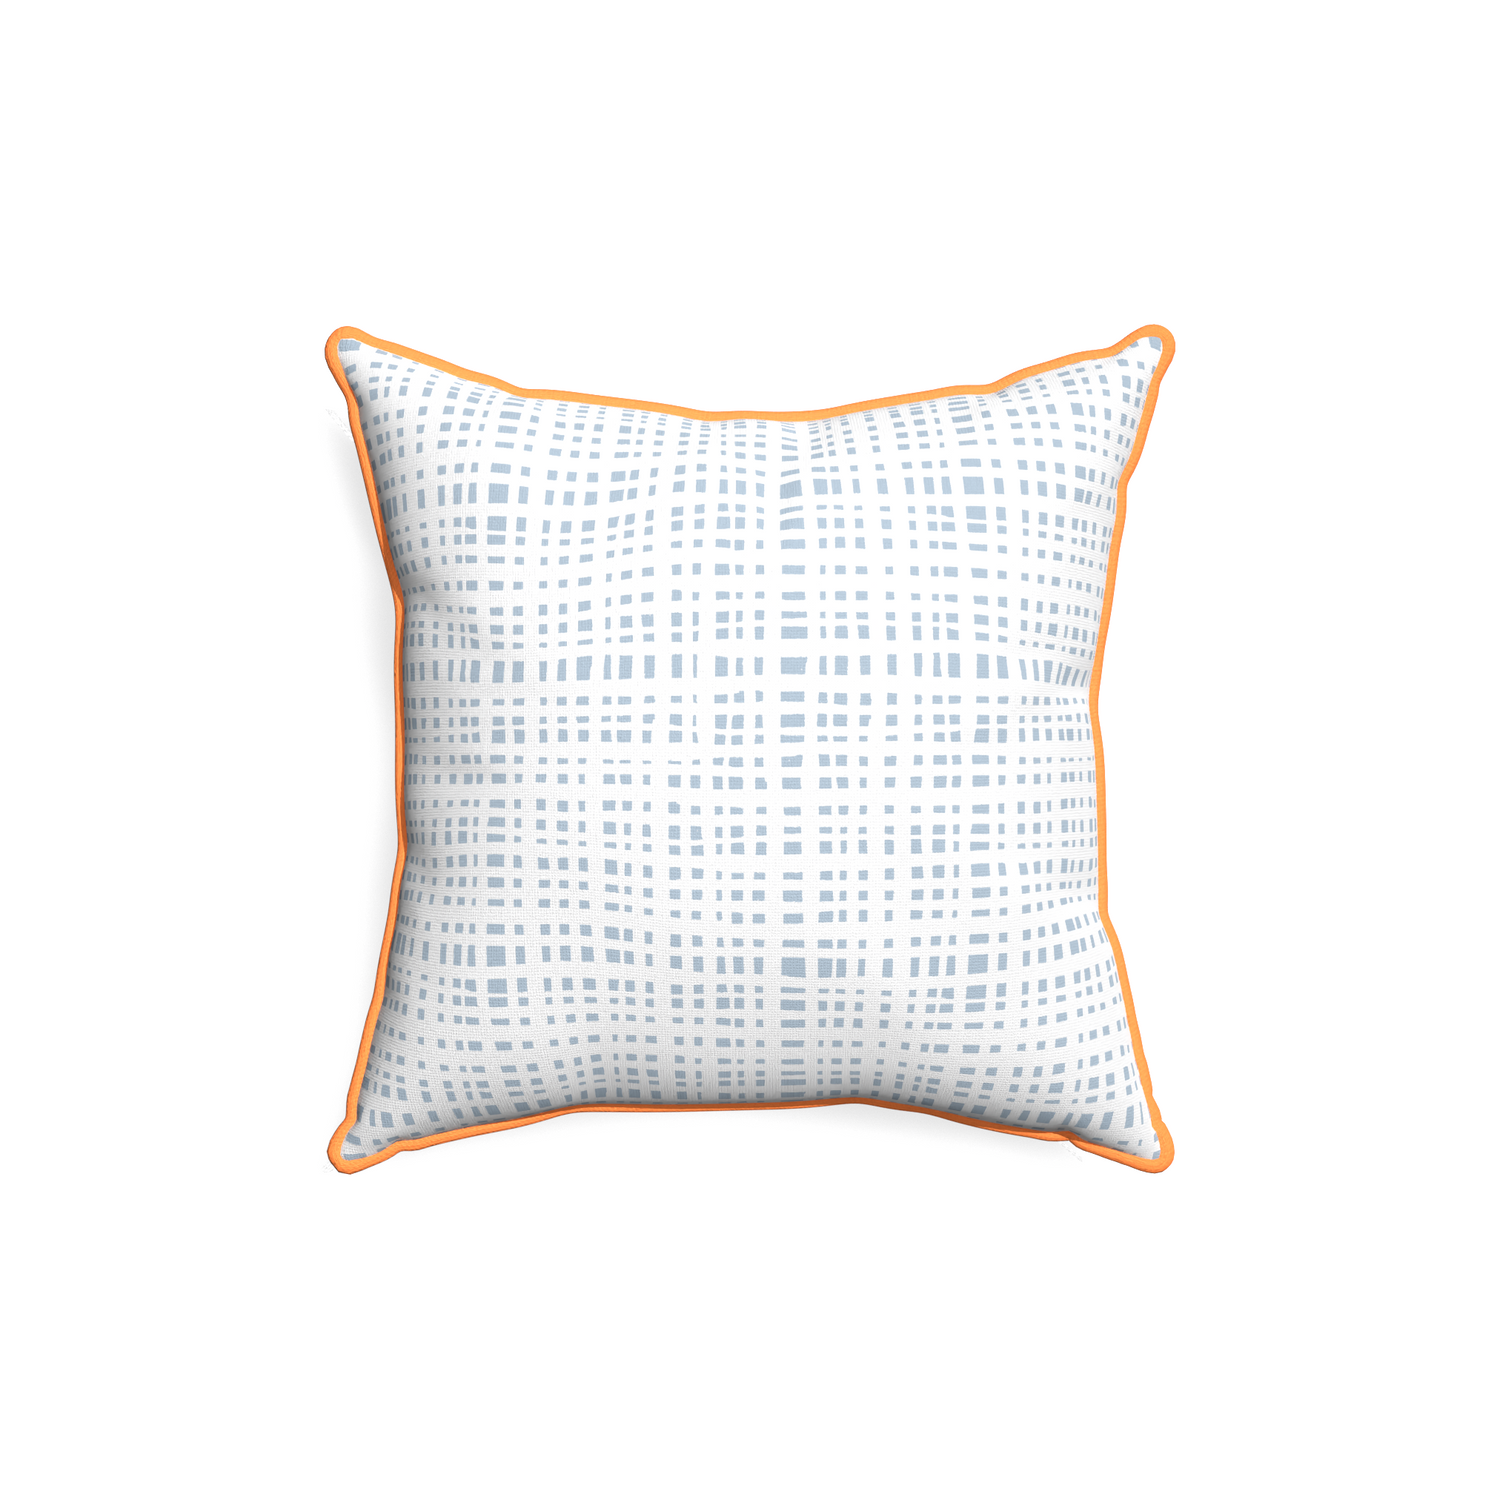 18-square ginger custom plaid sky bluepillow with clementine piping on white background